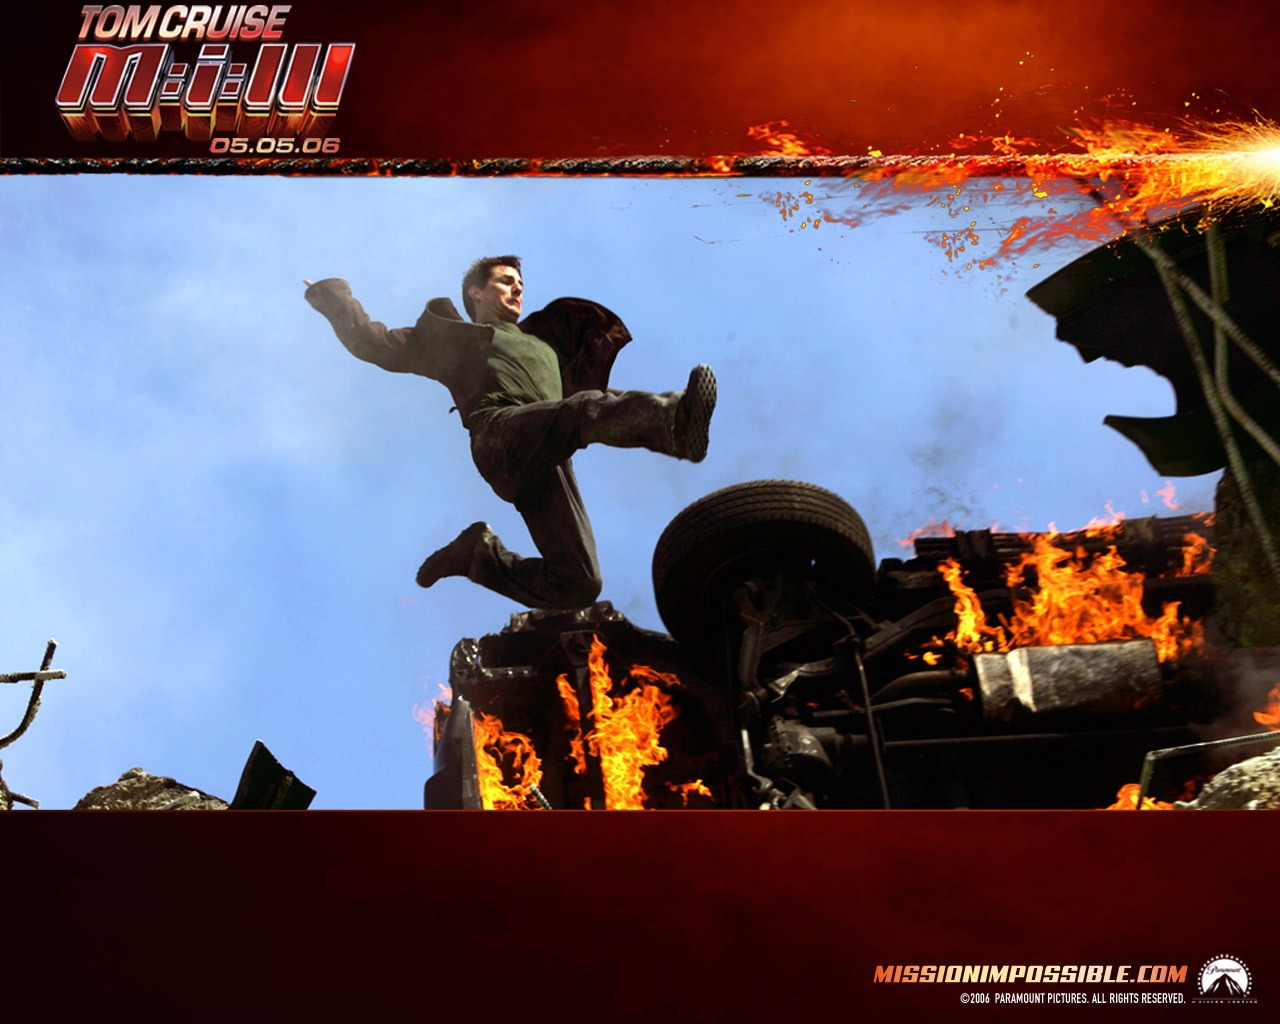 Mission Impossible 3 Wallpaper #4 - 1280x1024